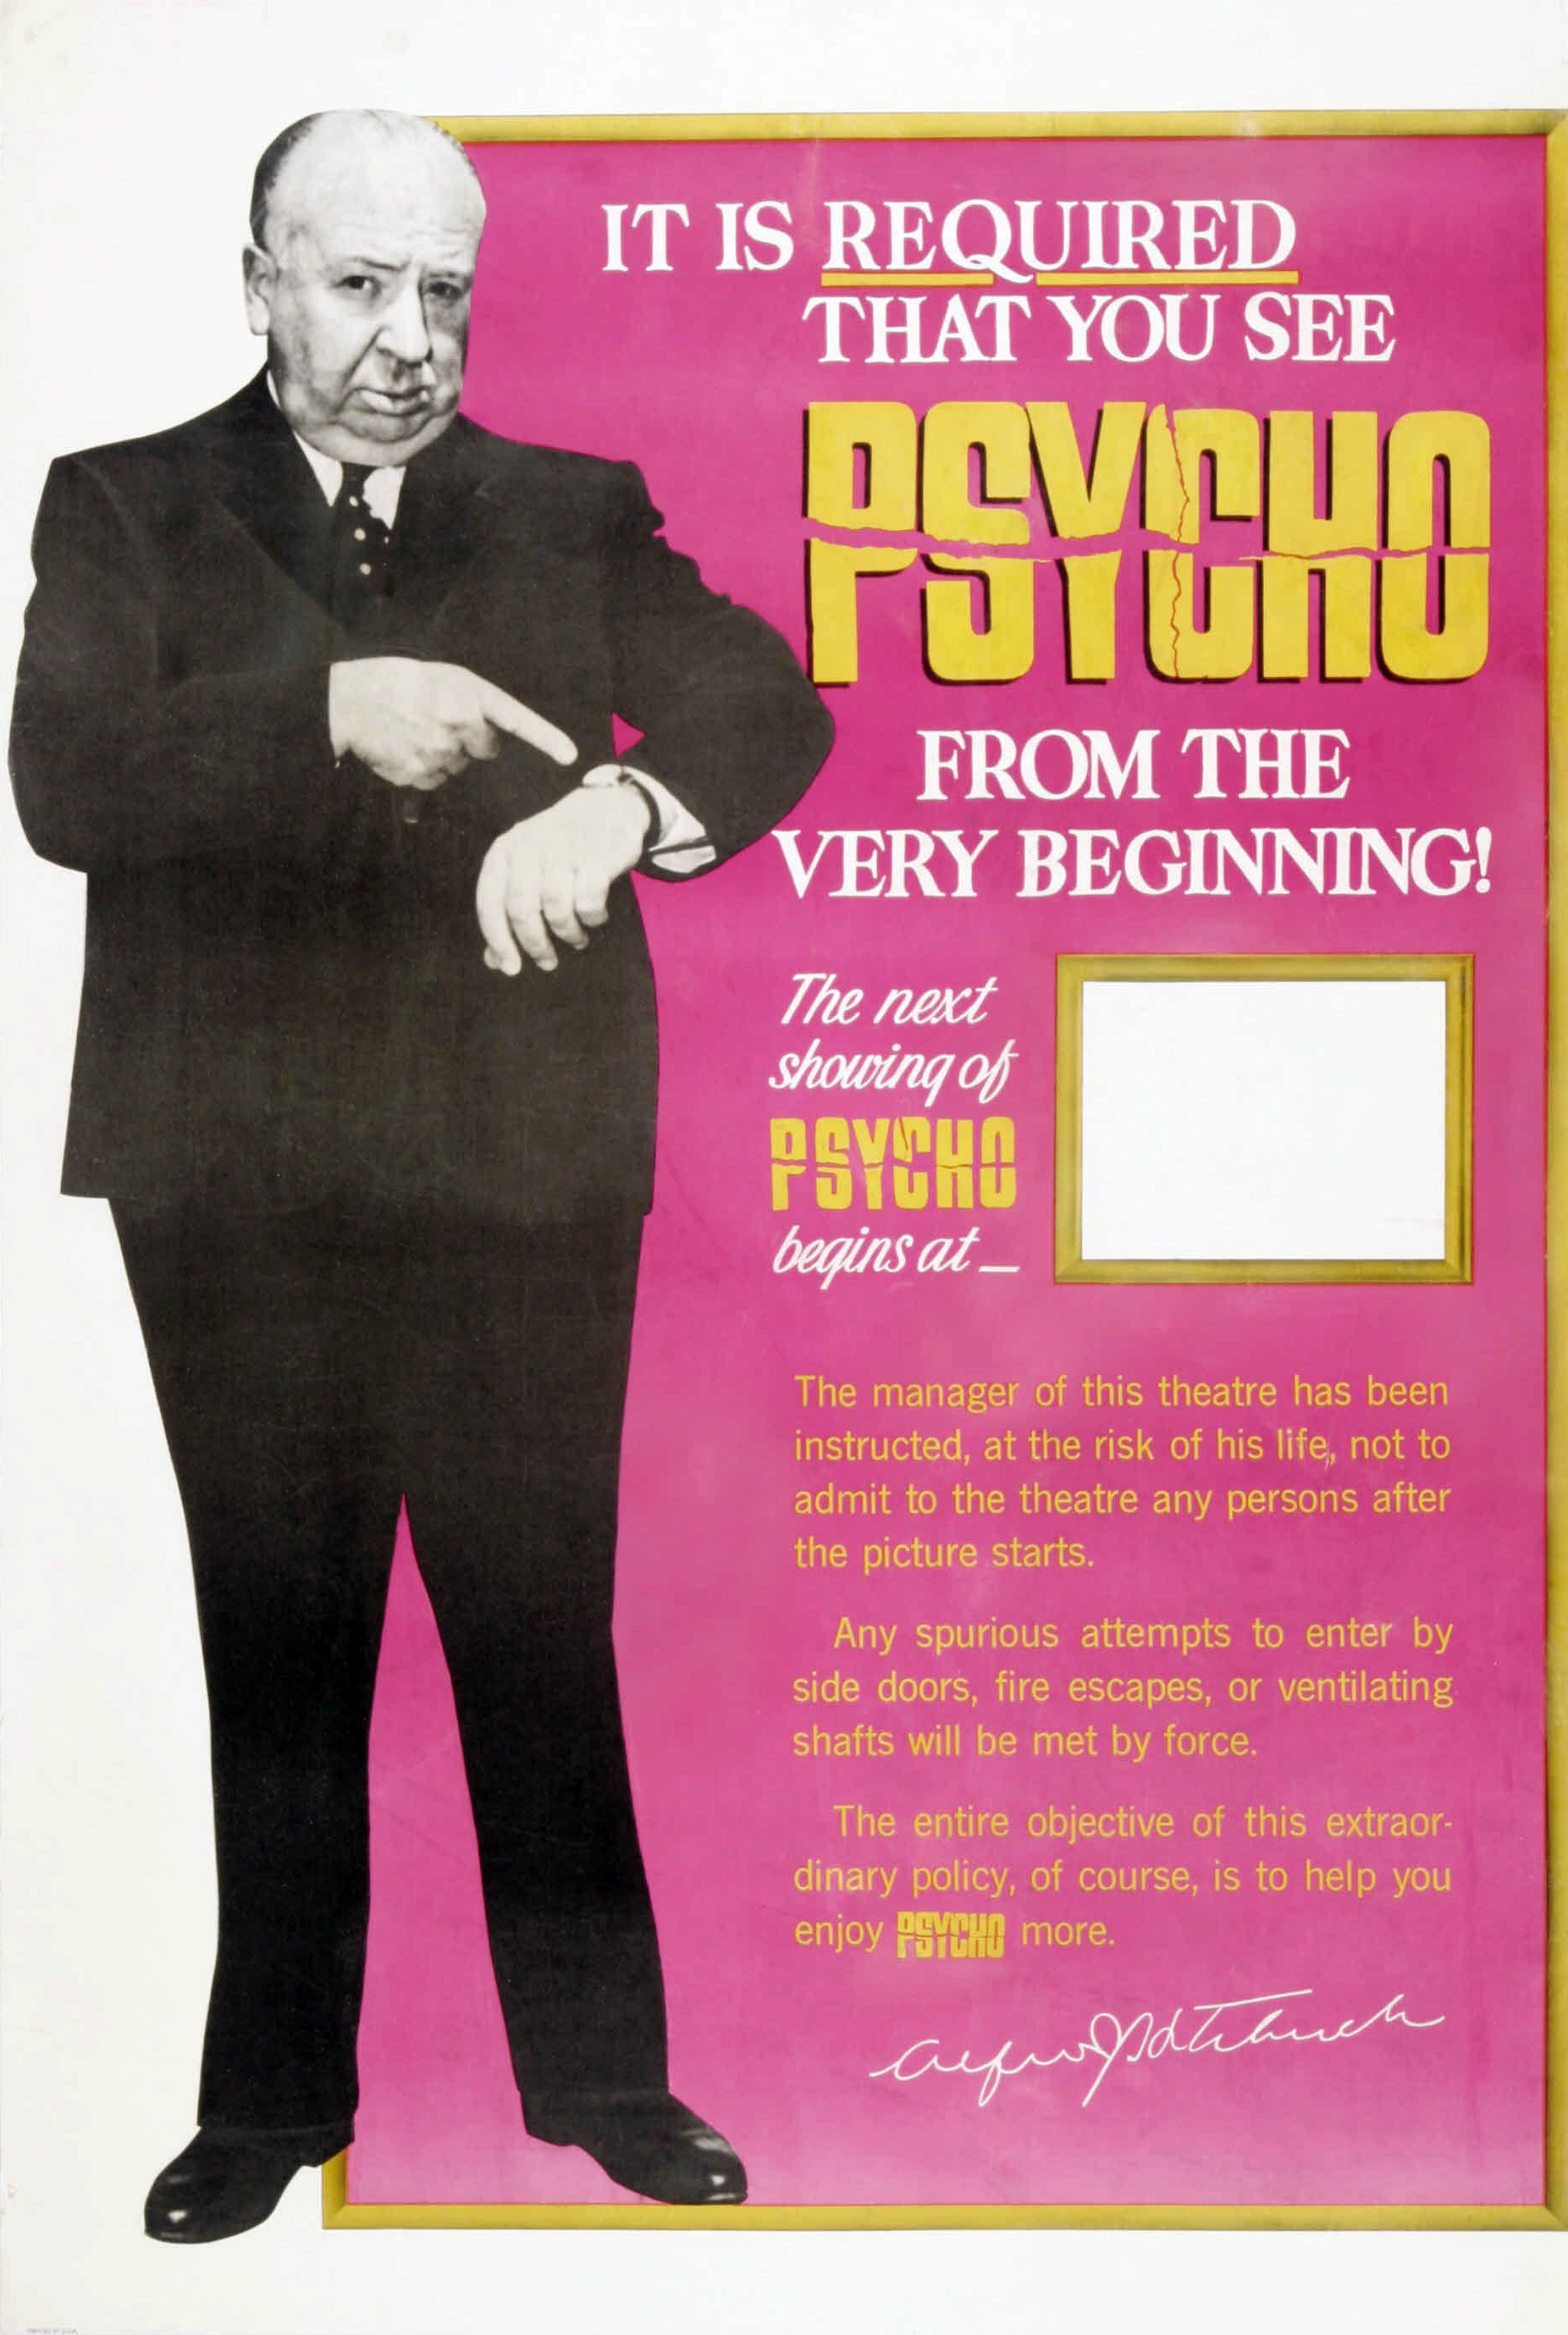 Alfred Hitchcock in a suit pointing to a sign that reads, &quot;It is required that you see &#x27;Psycho&#x27; from the very beginning!&quot; with showtime details